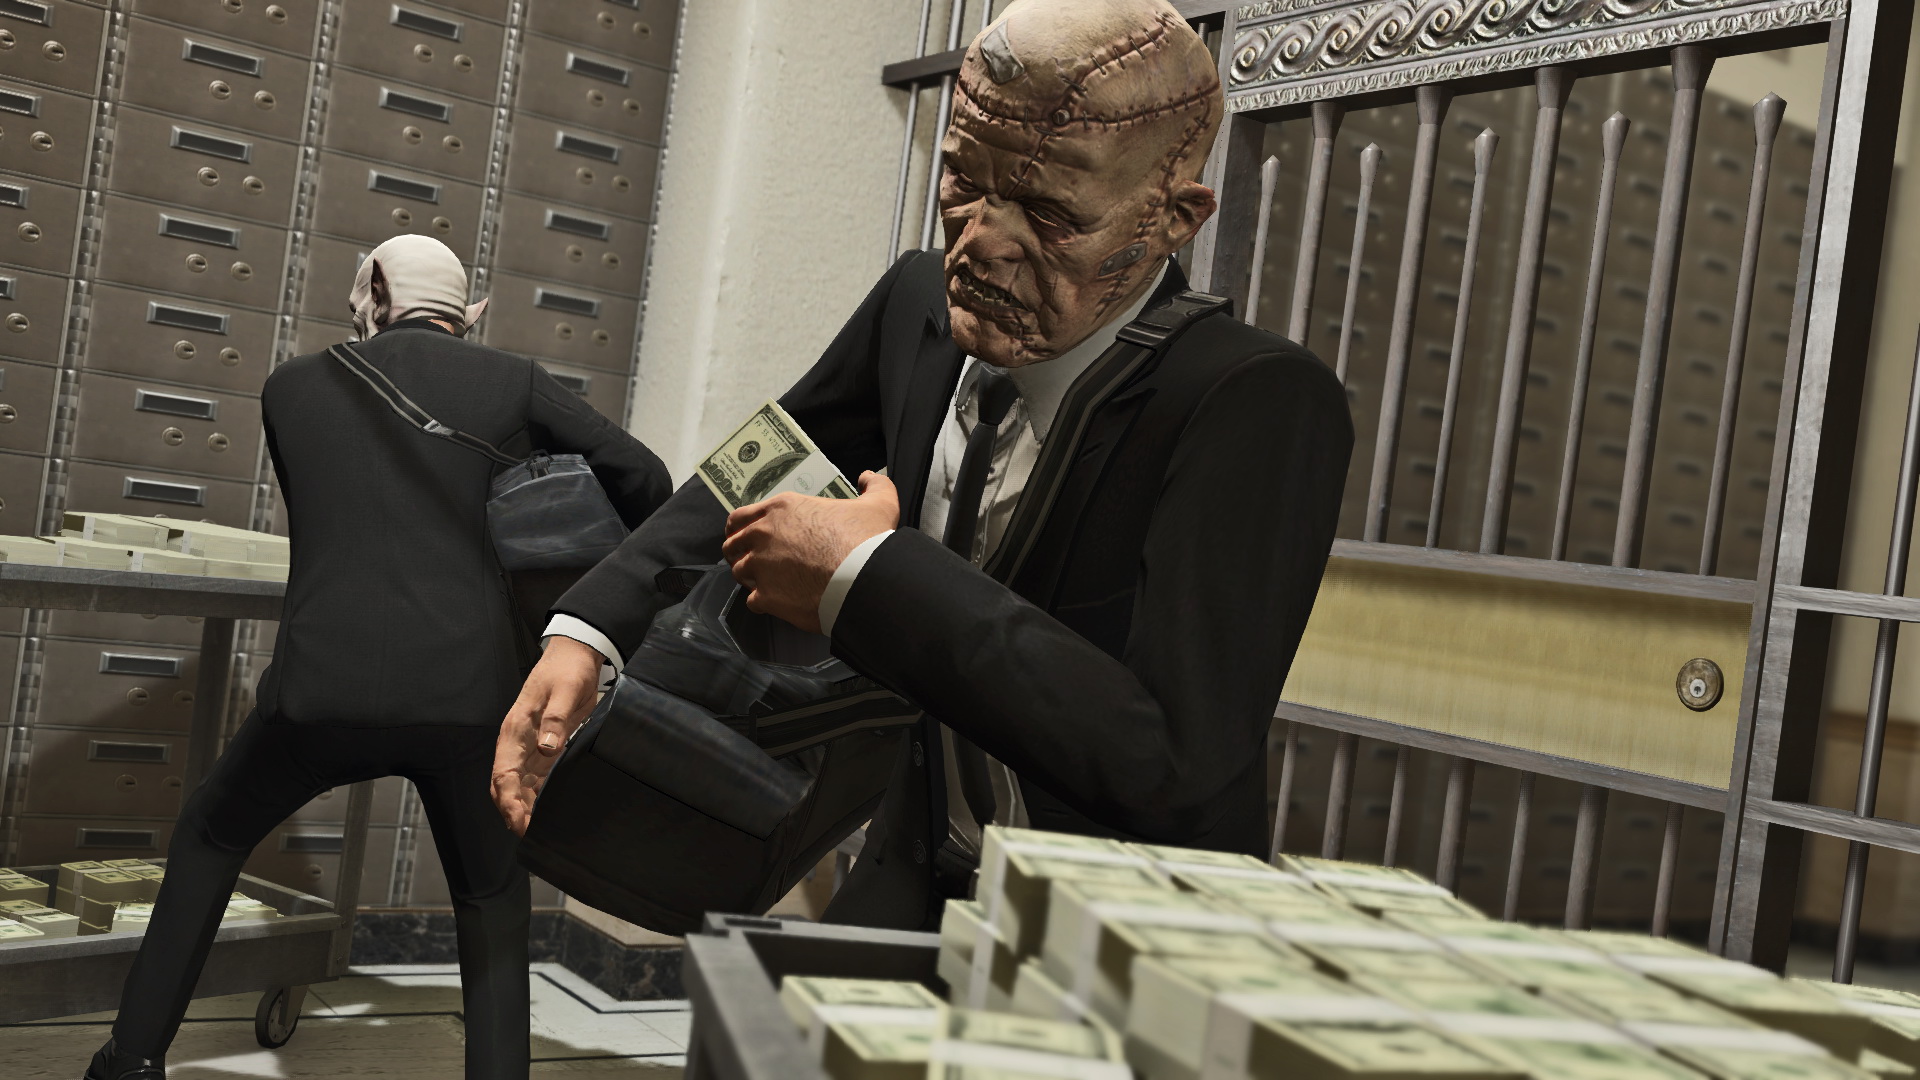 GTA Online will give your team of robbers plenty of opportunities to make a name for yourselves